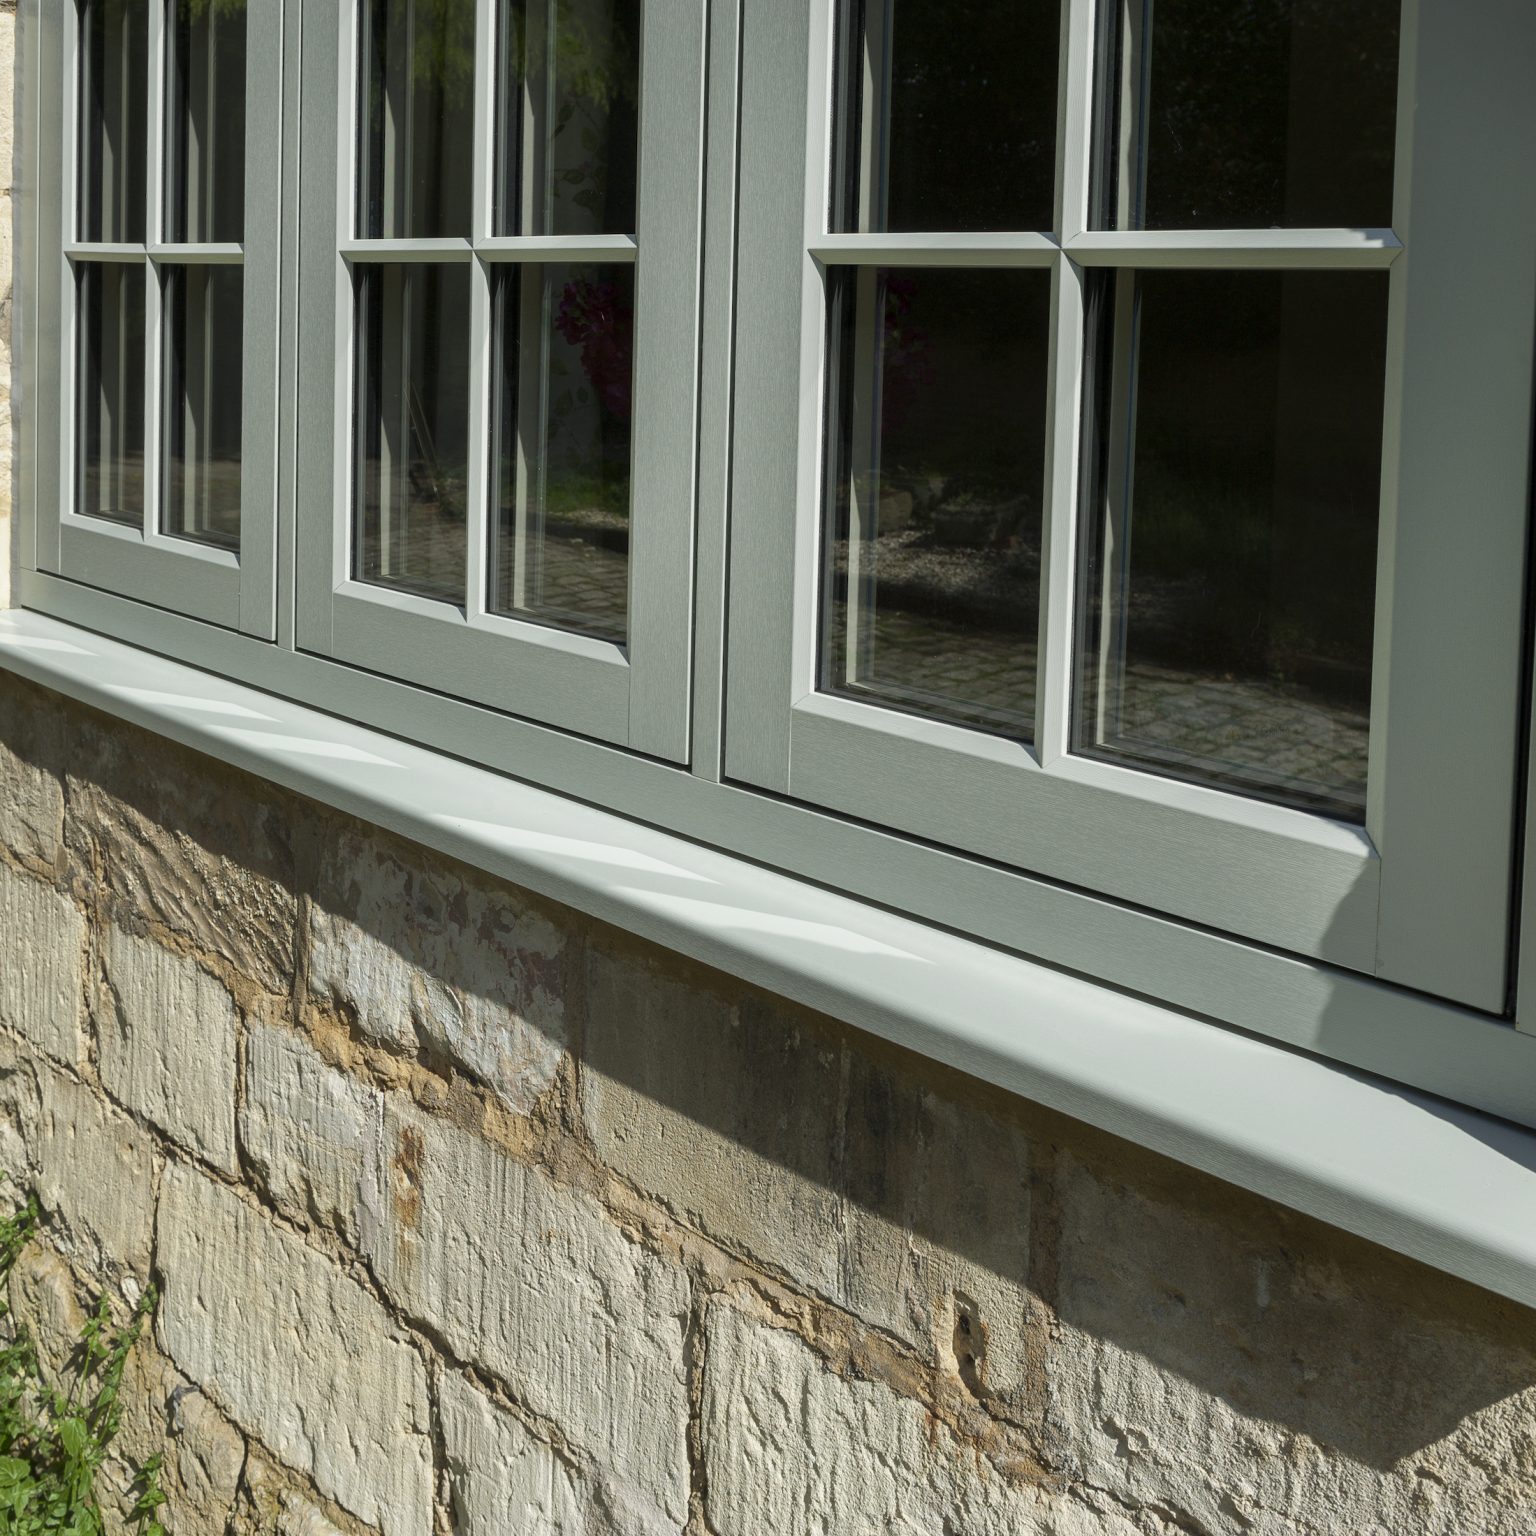 chartwell green Residence 9 timber-look windows